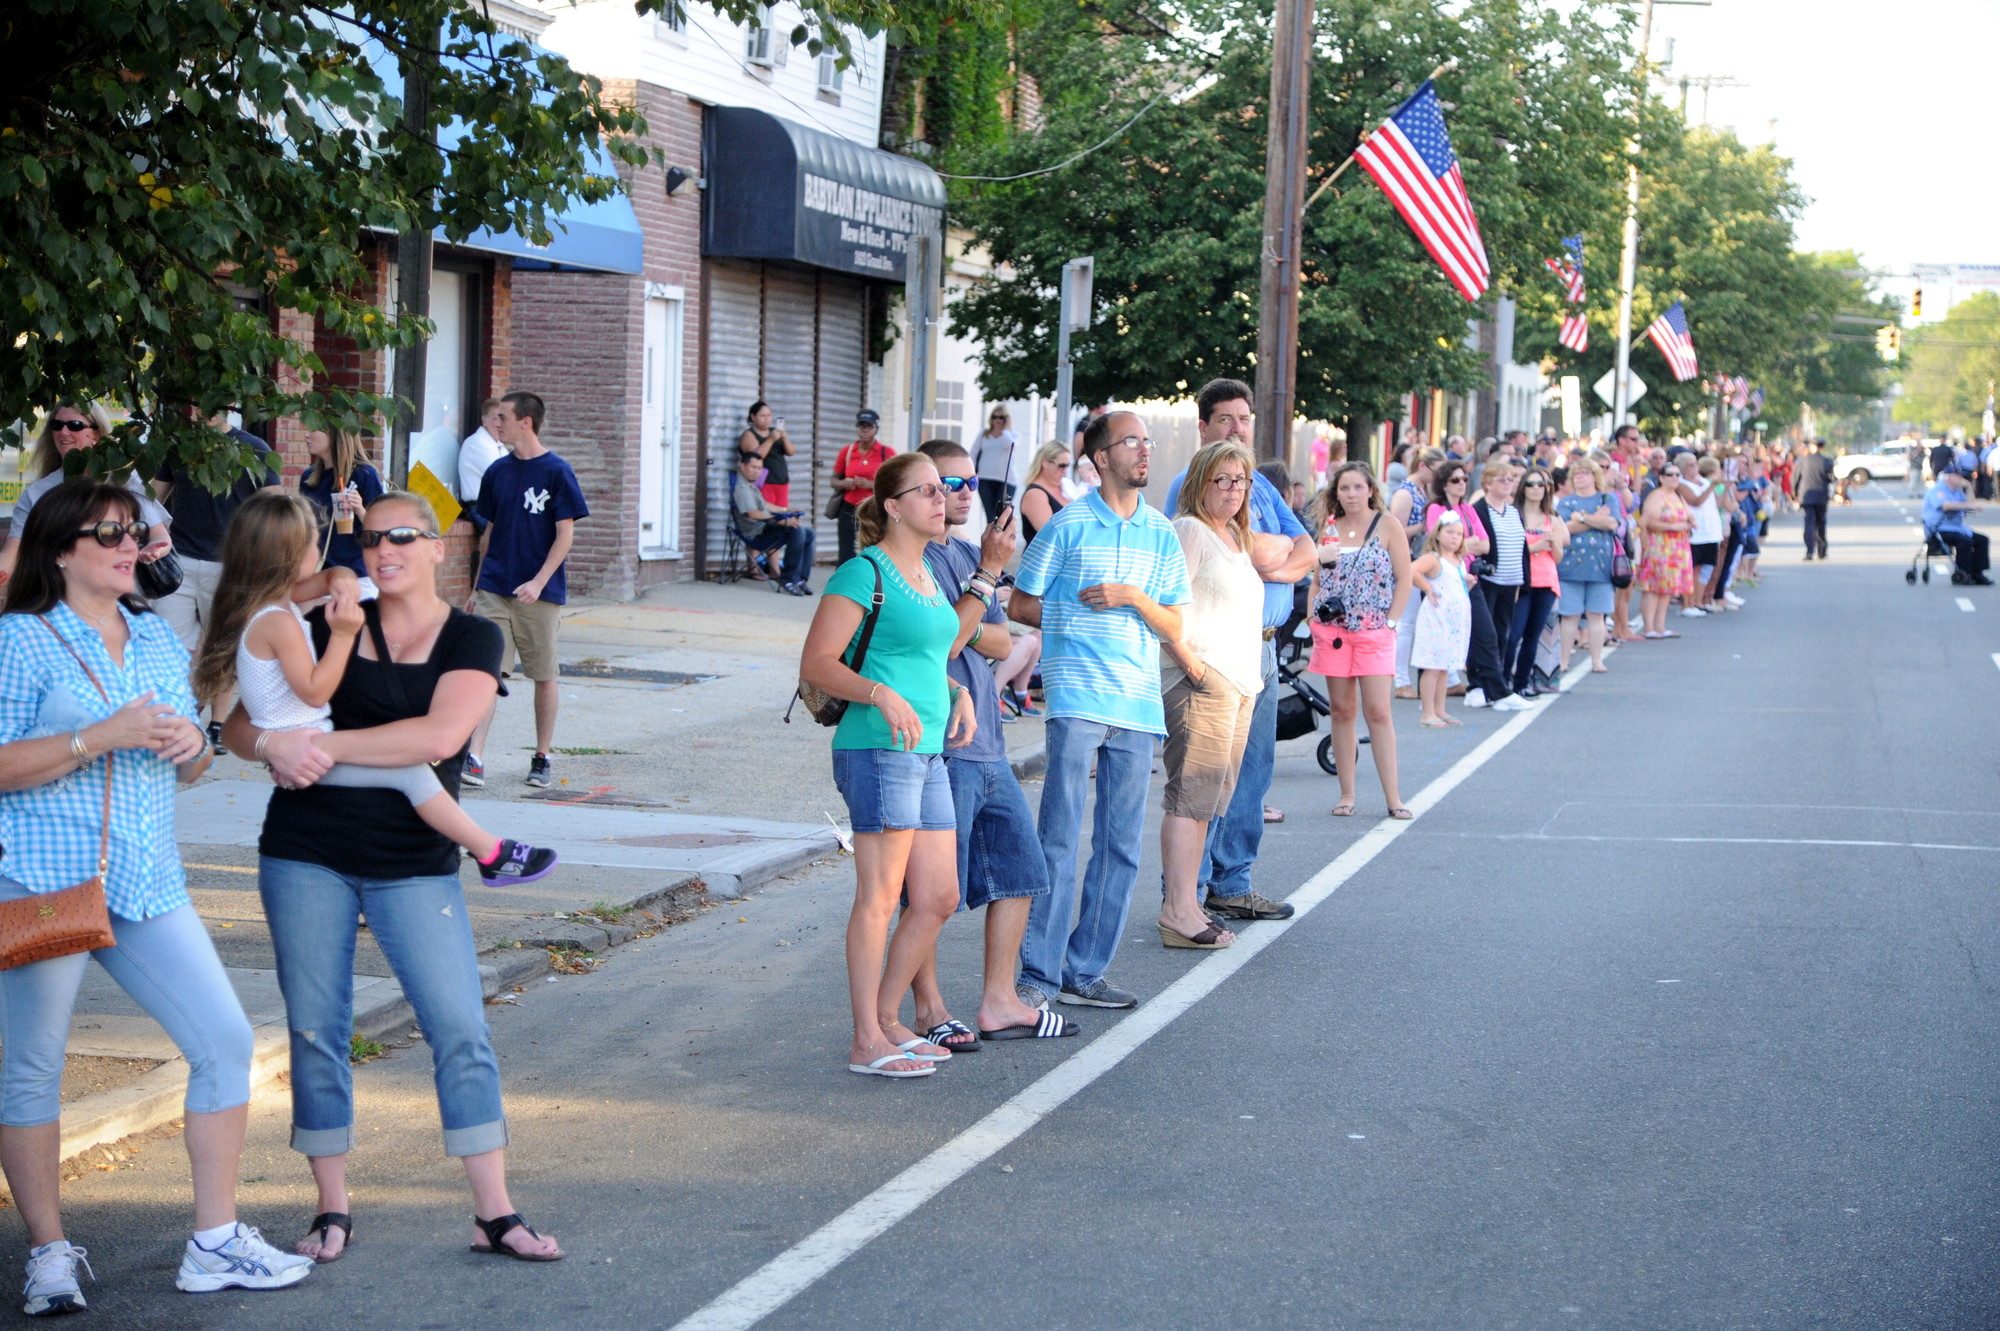 Residents lined the streets to support the firefighters.